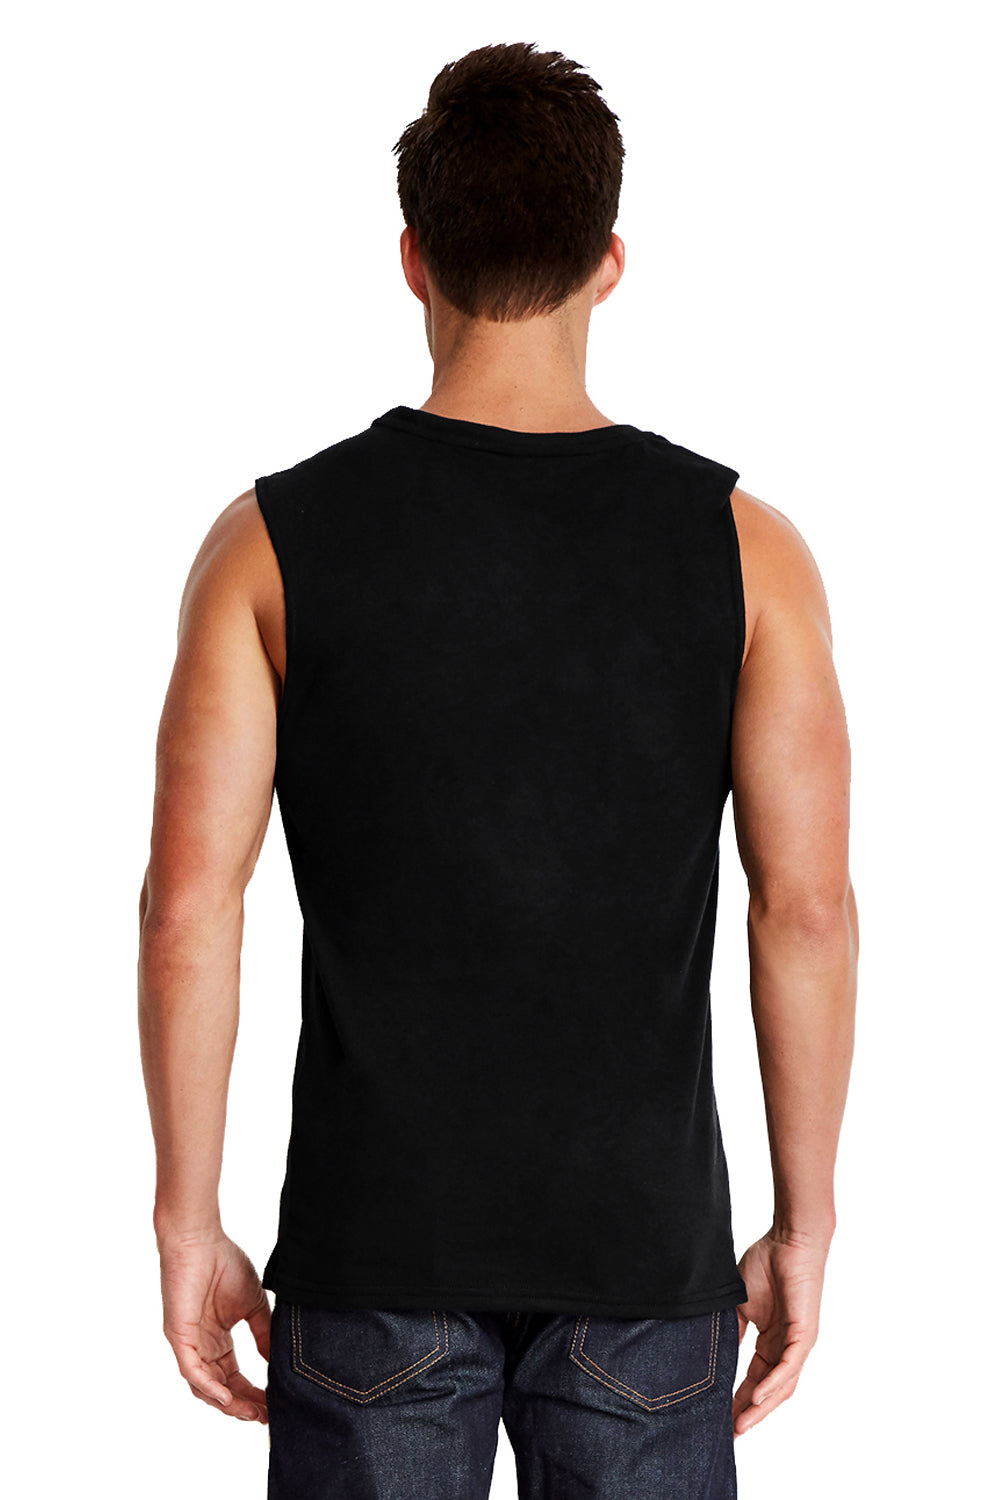 Next Level 6333 Mens Muscle Tank Top Black Back